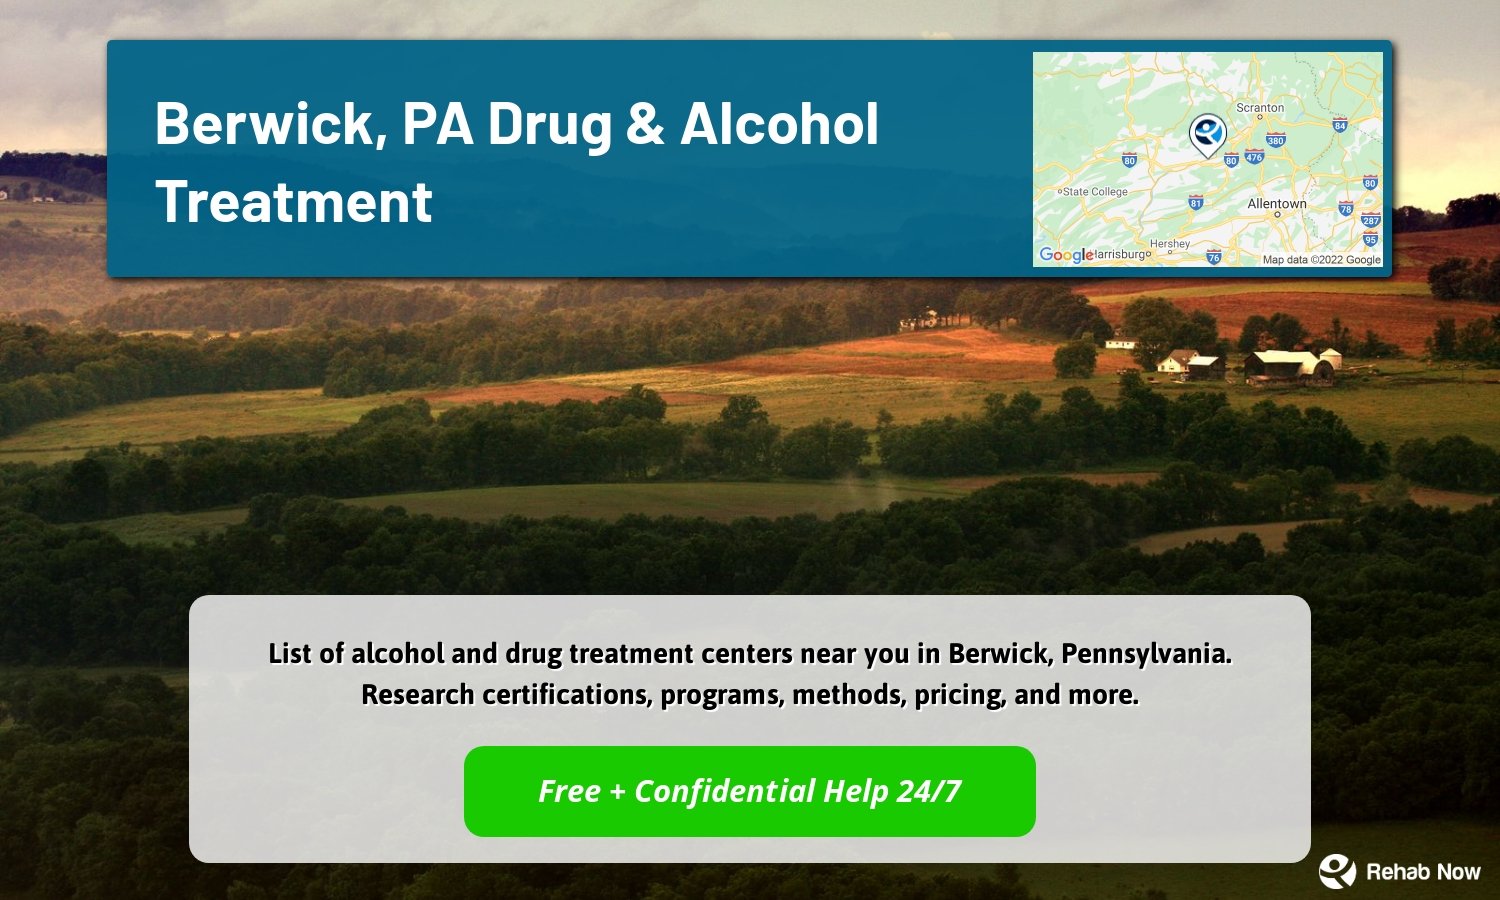 List of alcohol and drug treatment centers near you in Berwick, Pennsylvania. Research certifications, programs, methods, pricing, and more.